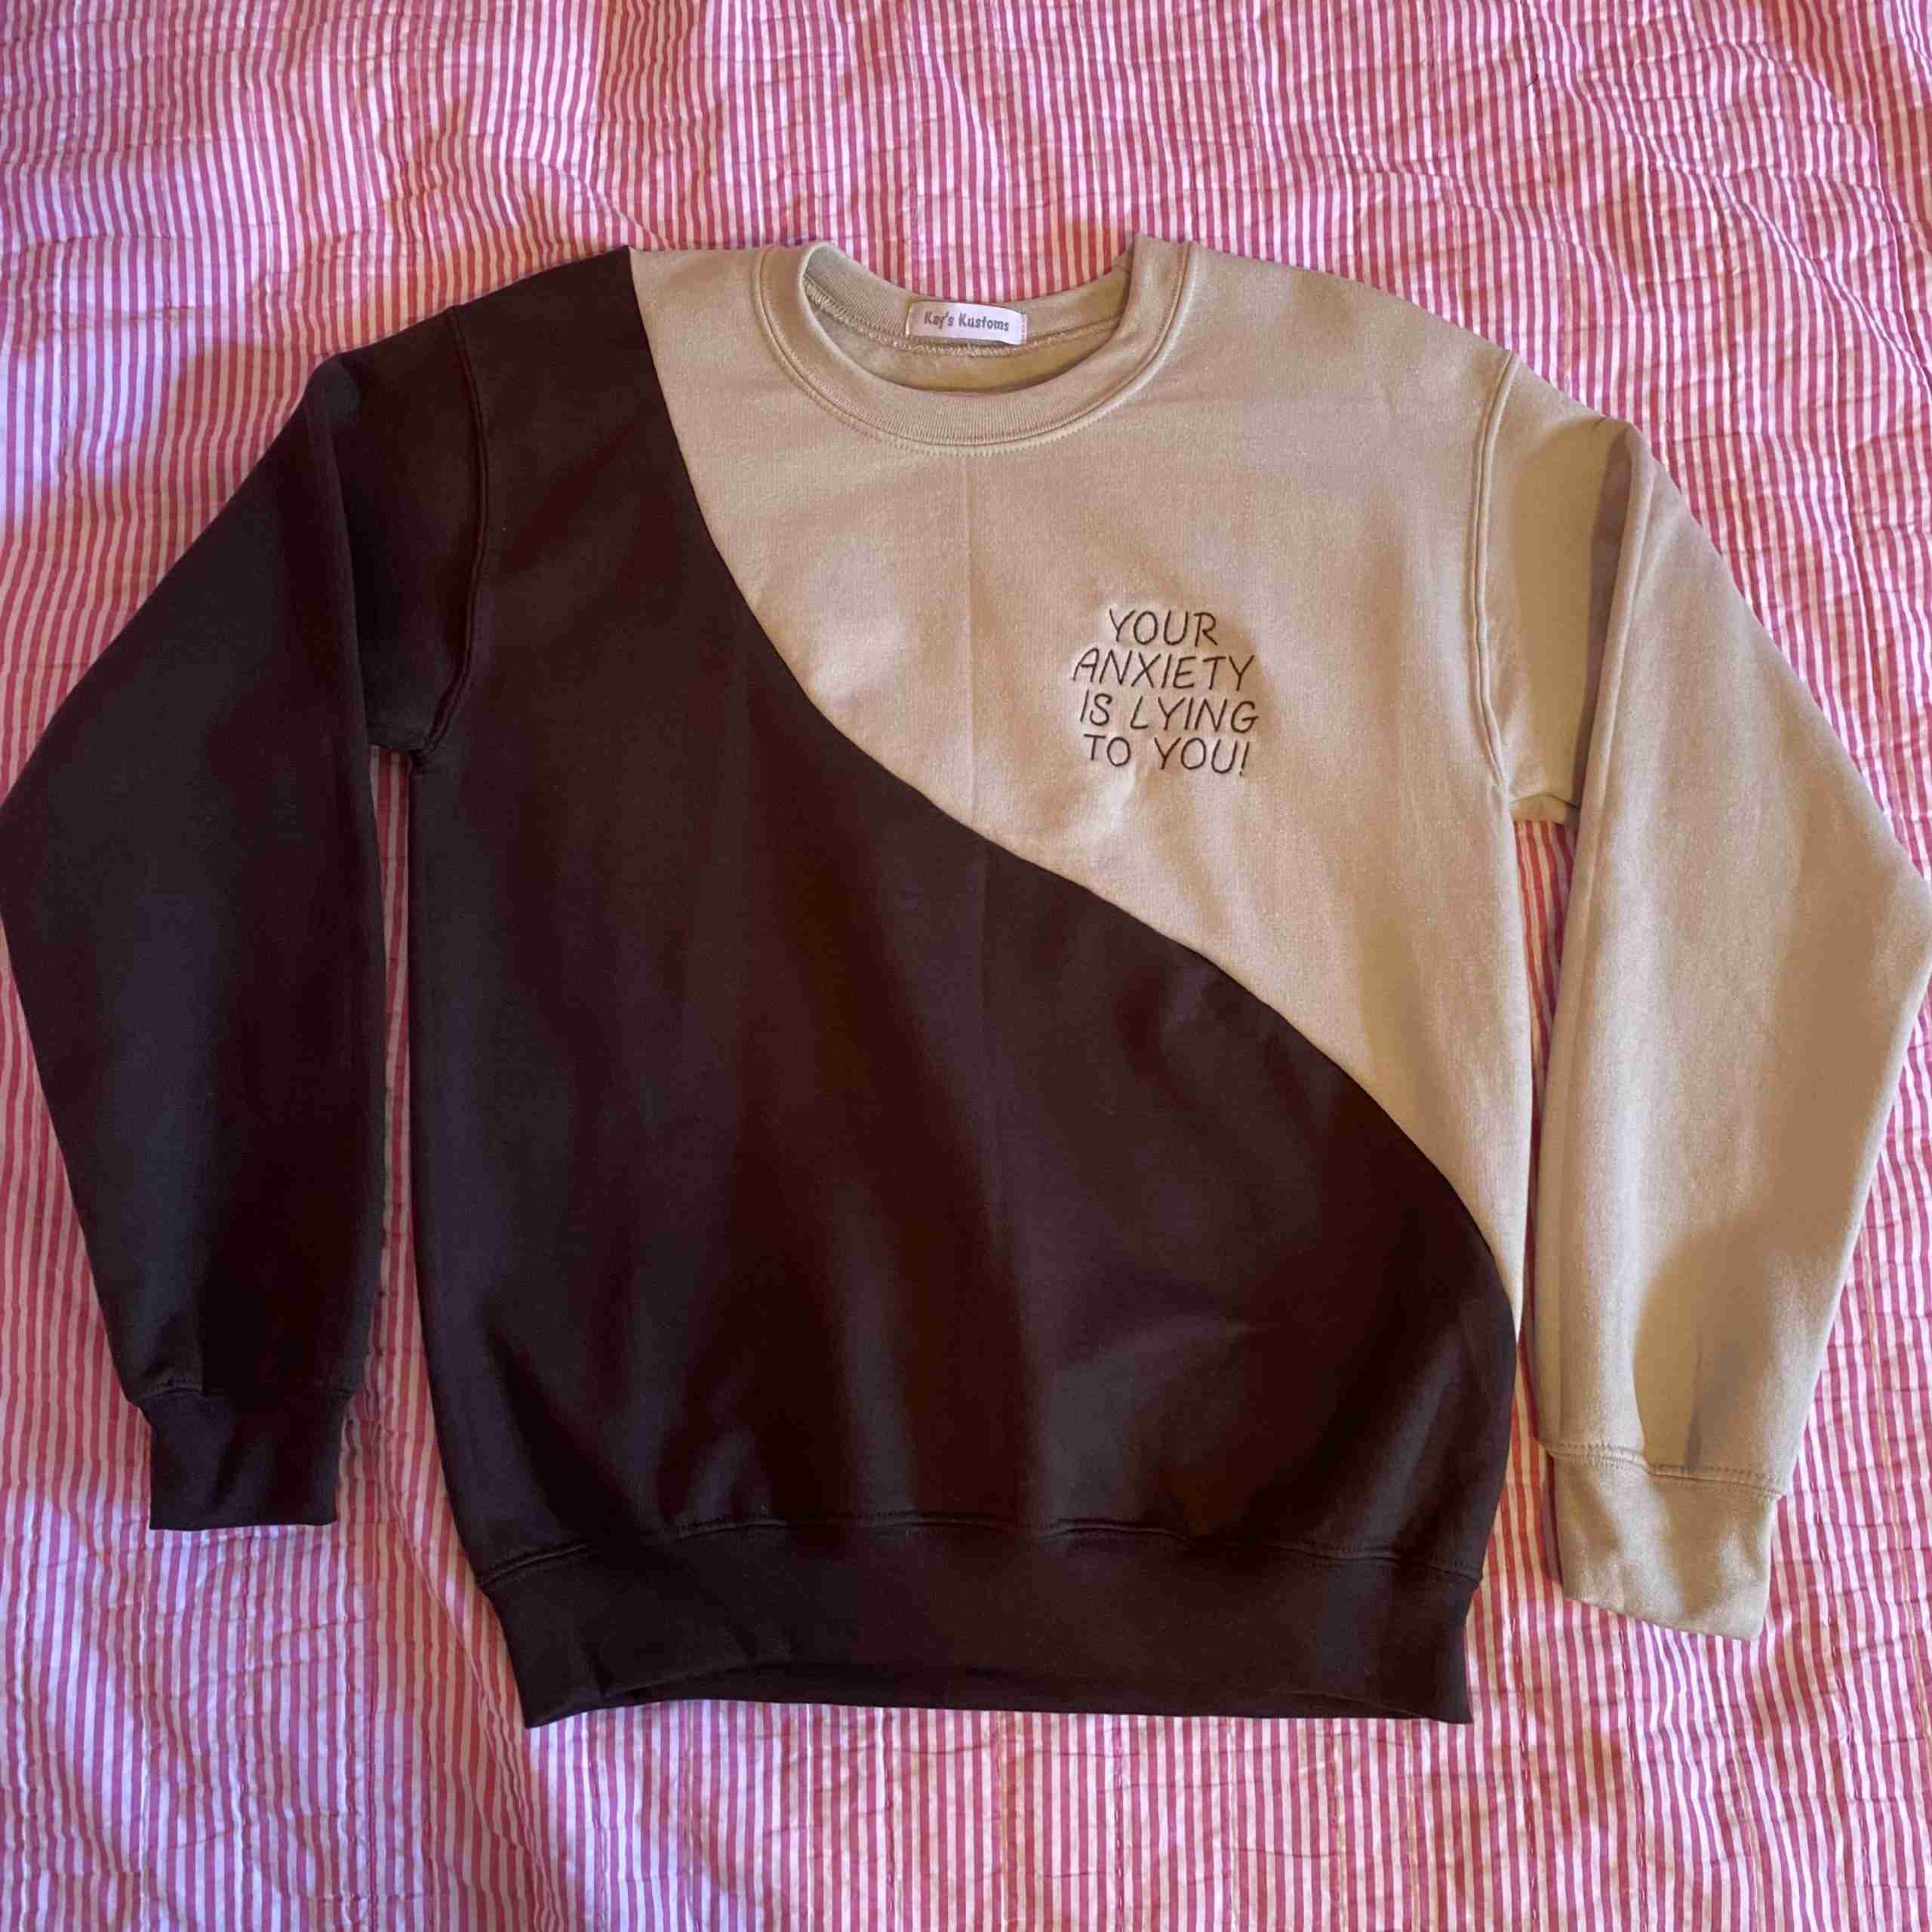 a black and tan sweatshirt with a white and brown design on it.